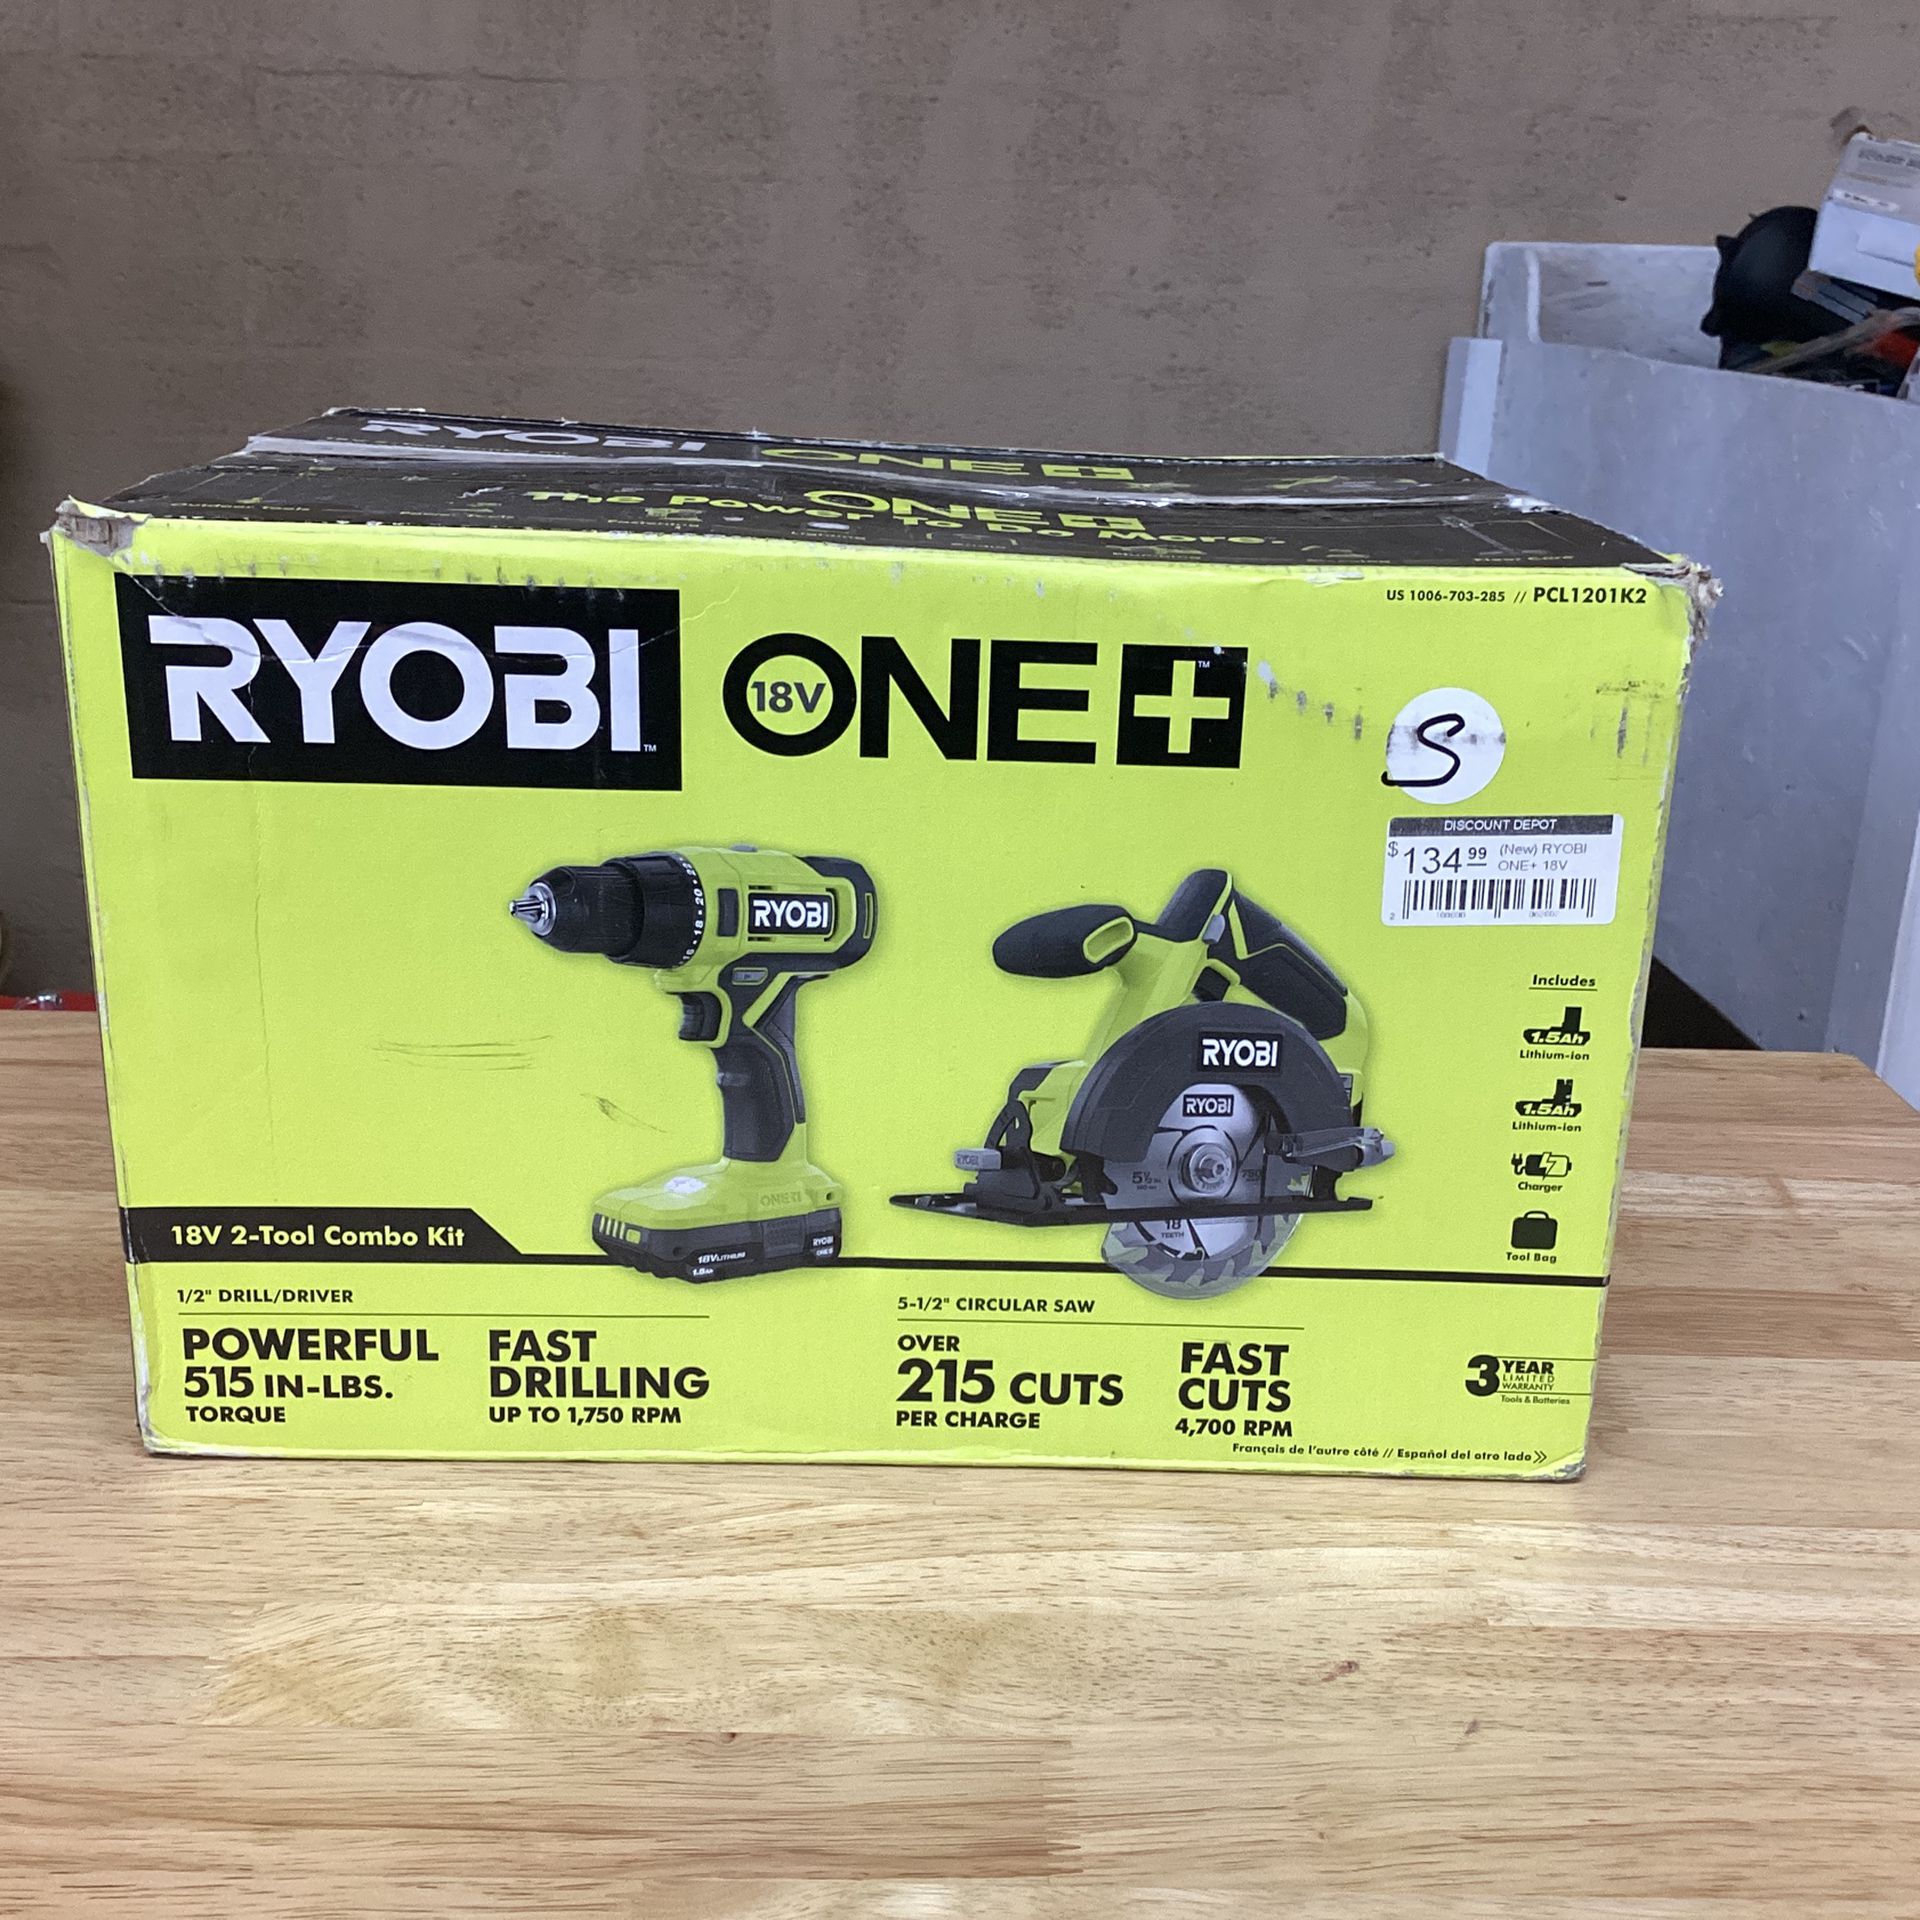 (New) RYOBI ONE+ 18V Cordless 2-Tool Combo Kit with Drill/Driver, Circular Saw, (2) 1.5 Ah Batteries, and Charger